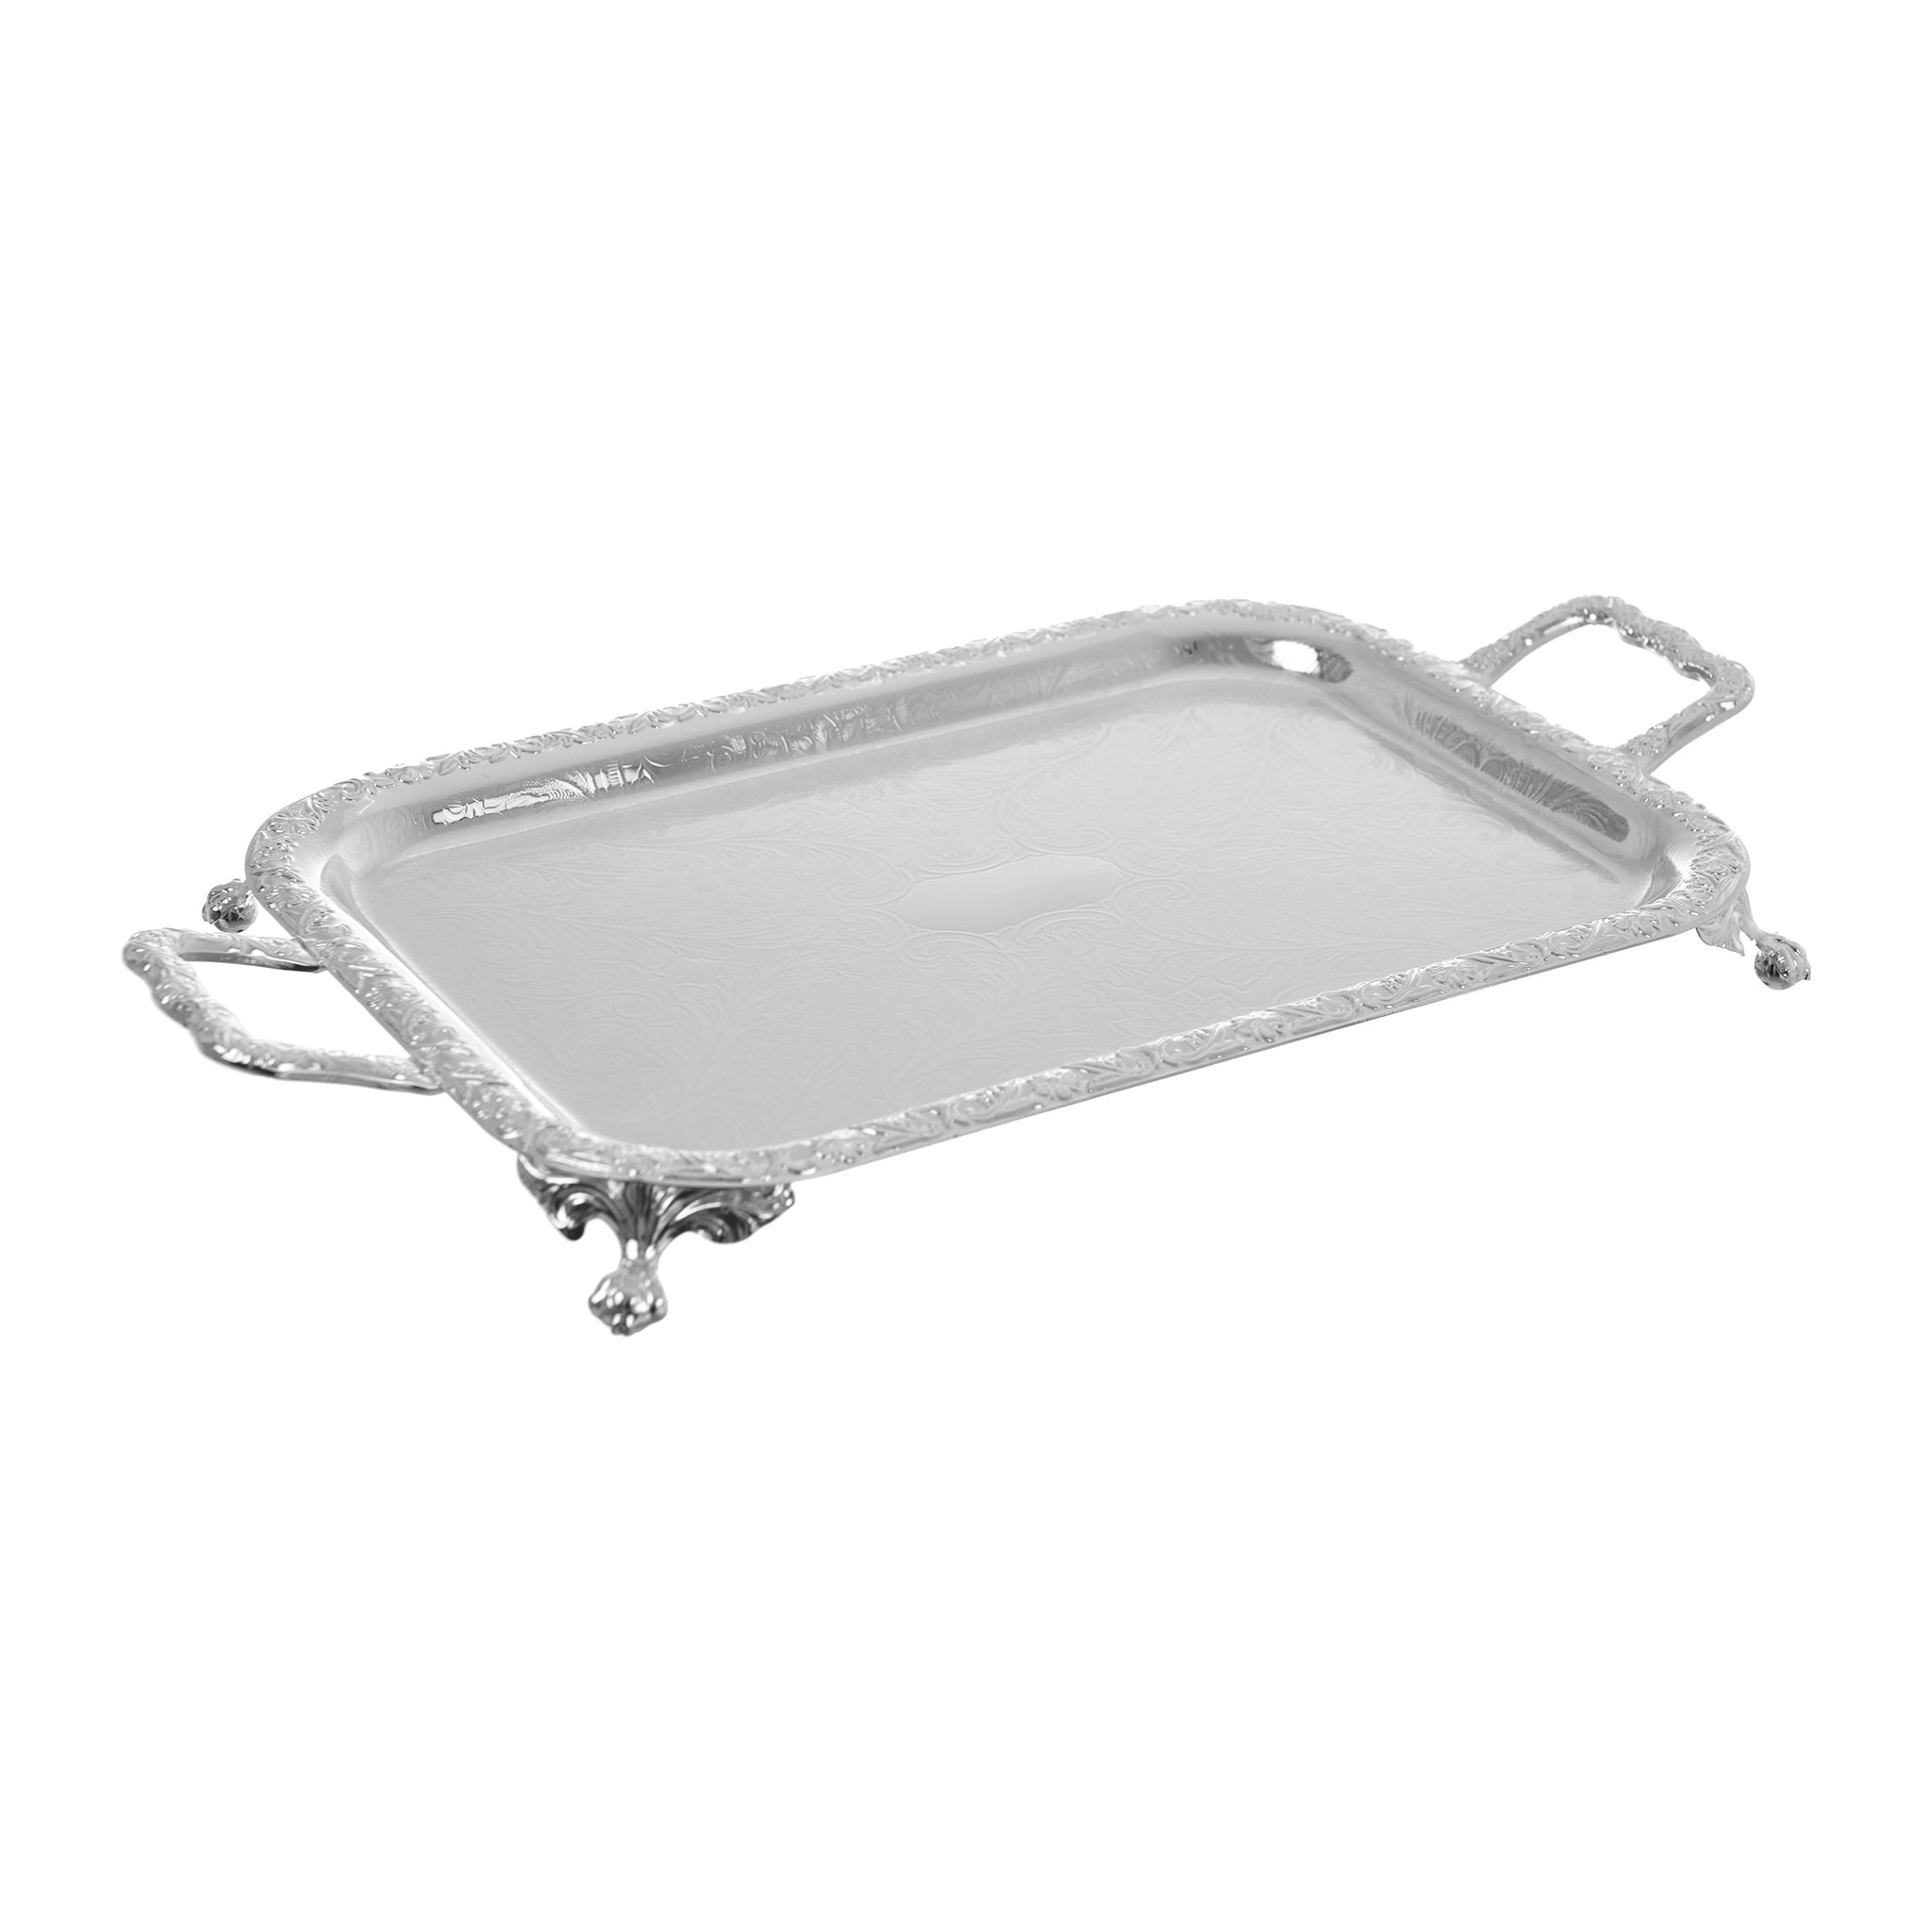 Queen Anne - Rectangular Tray with Handles & Legs - Silver Plated Metal - 44x24.5cm - 26000391